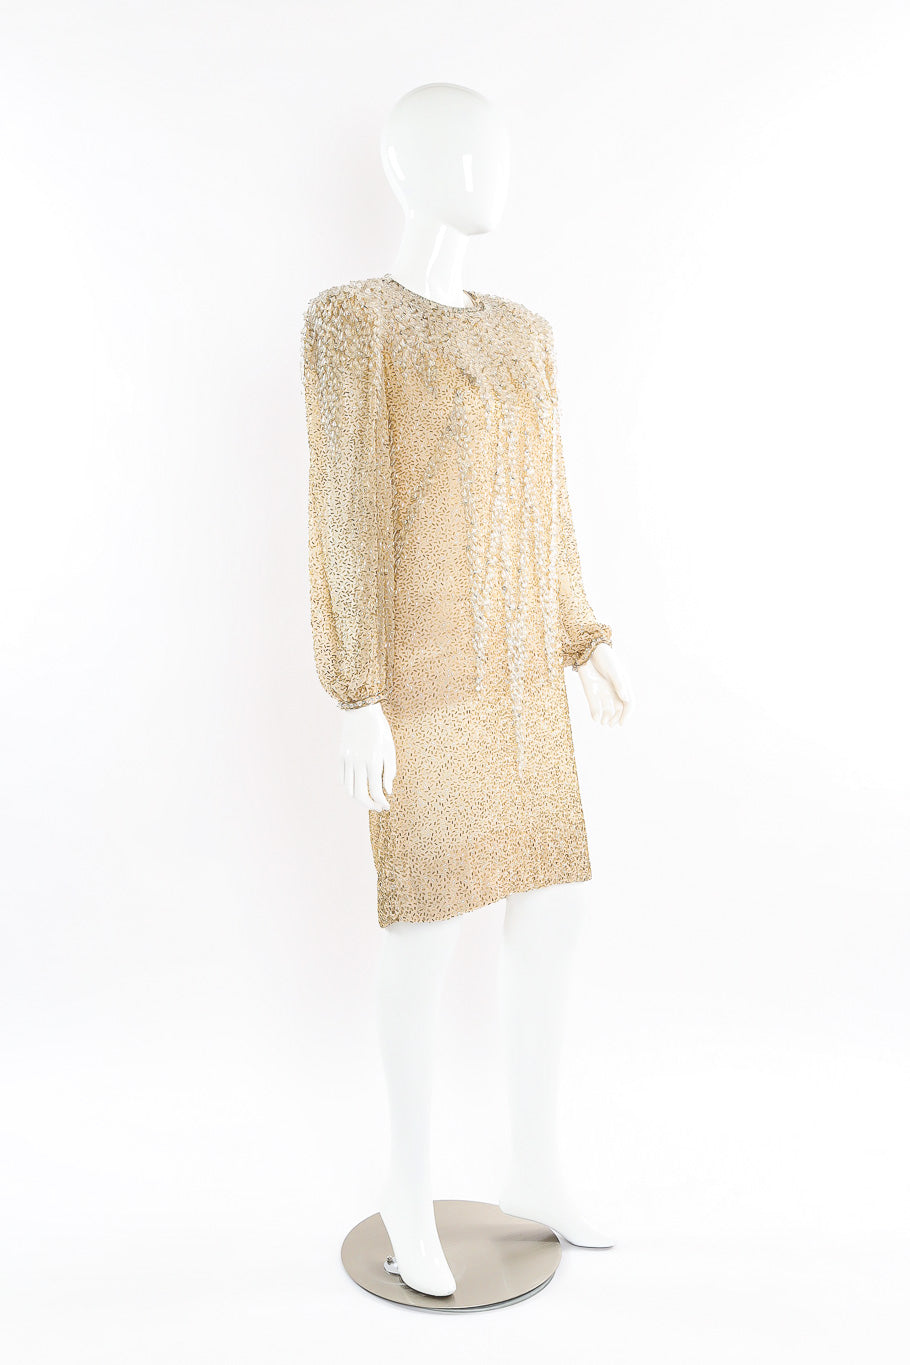 Beaded champagne silk shift dress by Victoria Royal Side View. @recesla